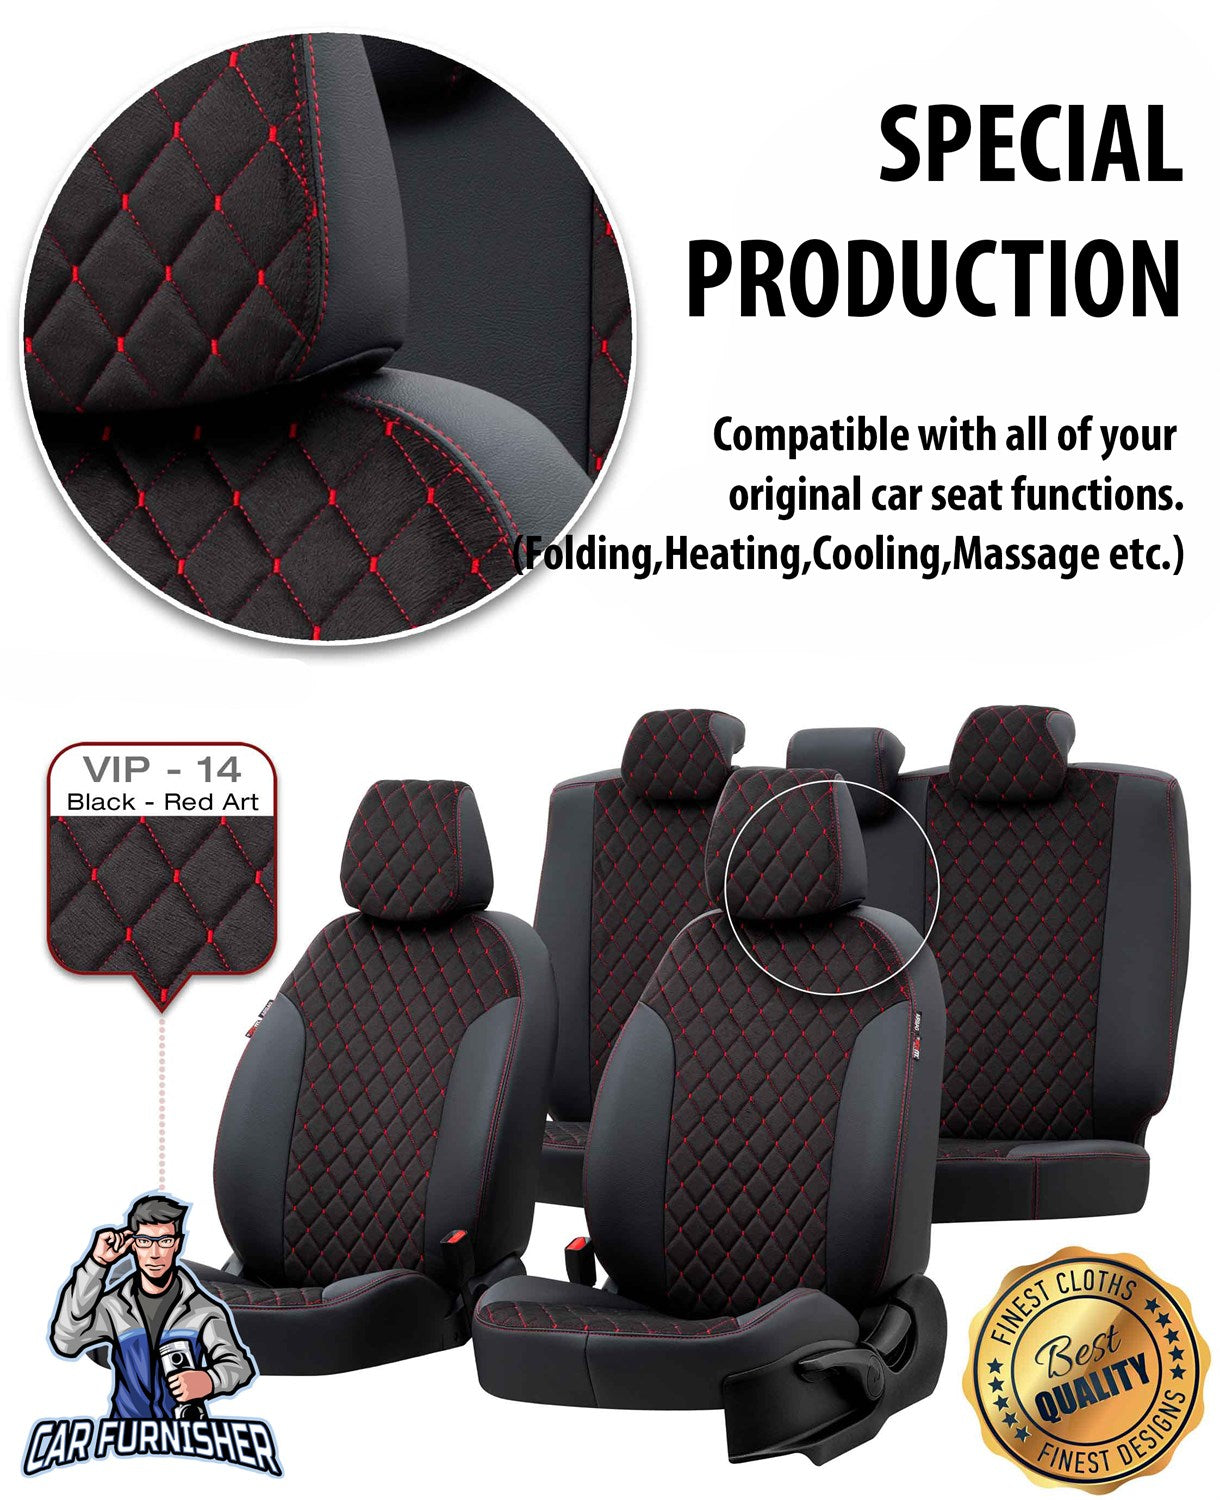 Daihatsu Terios Seat Covers Madrid Foal Feather Design Dark Gray Leather & Foal Feather